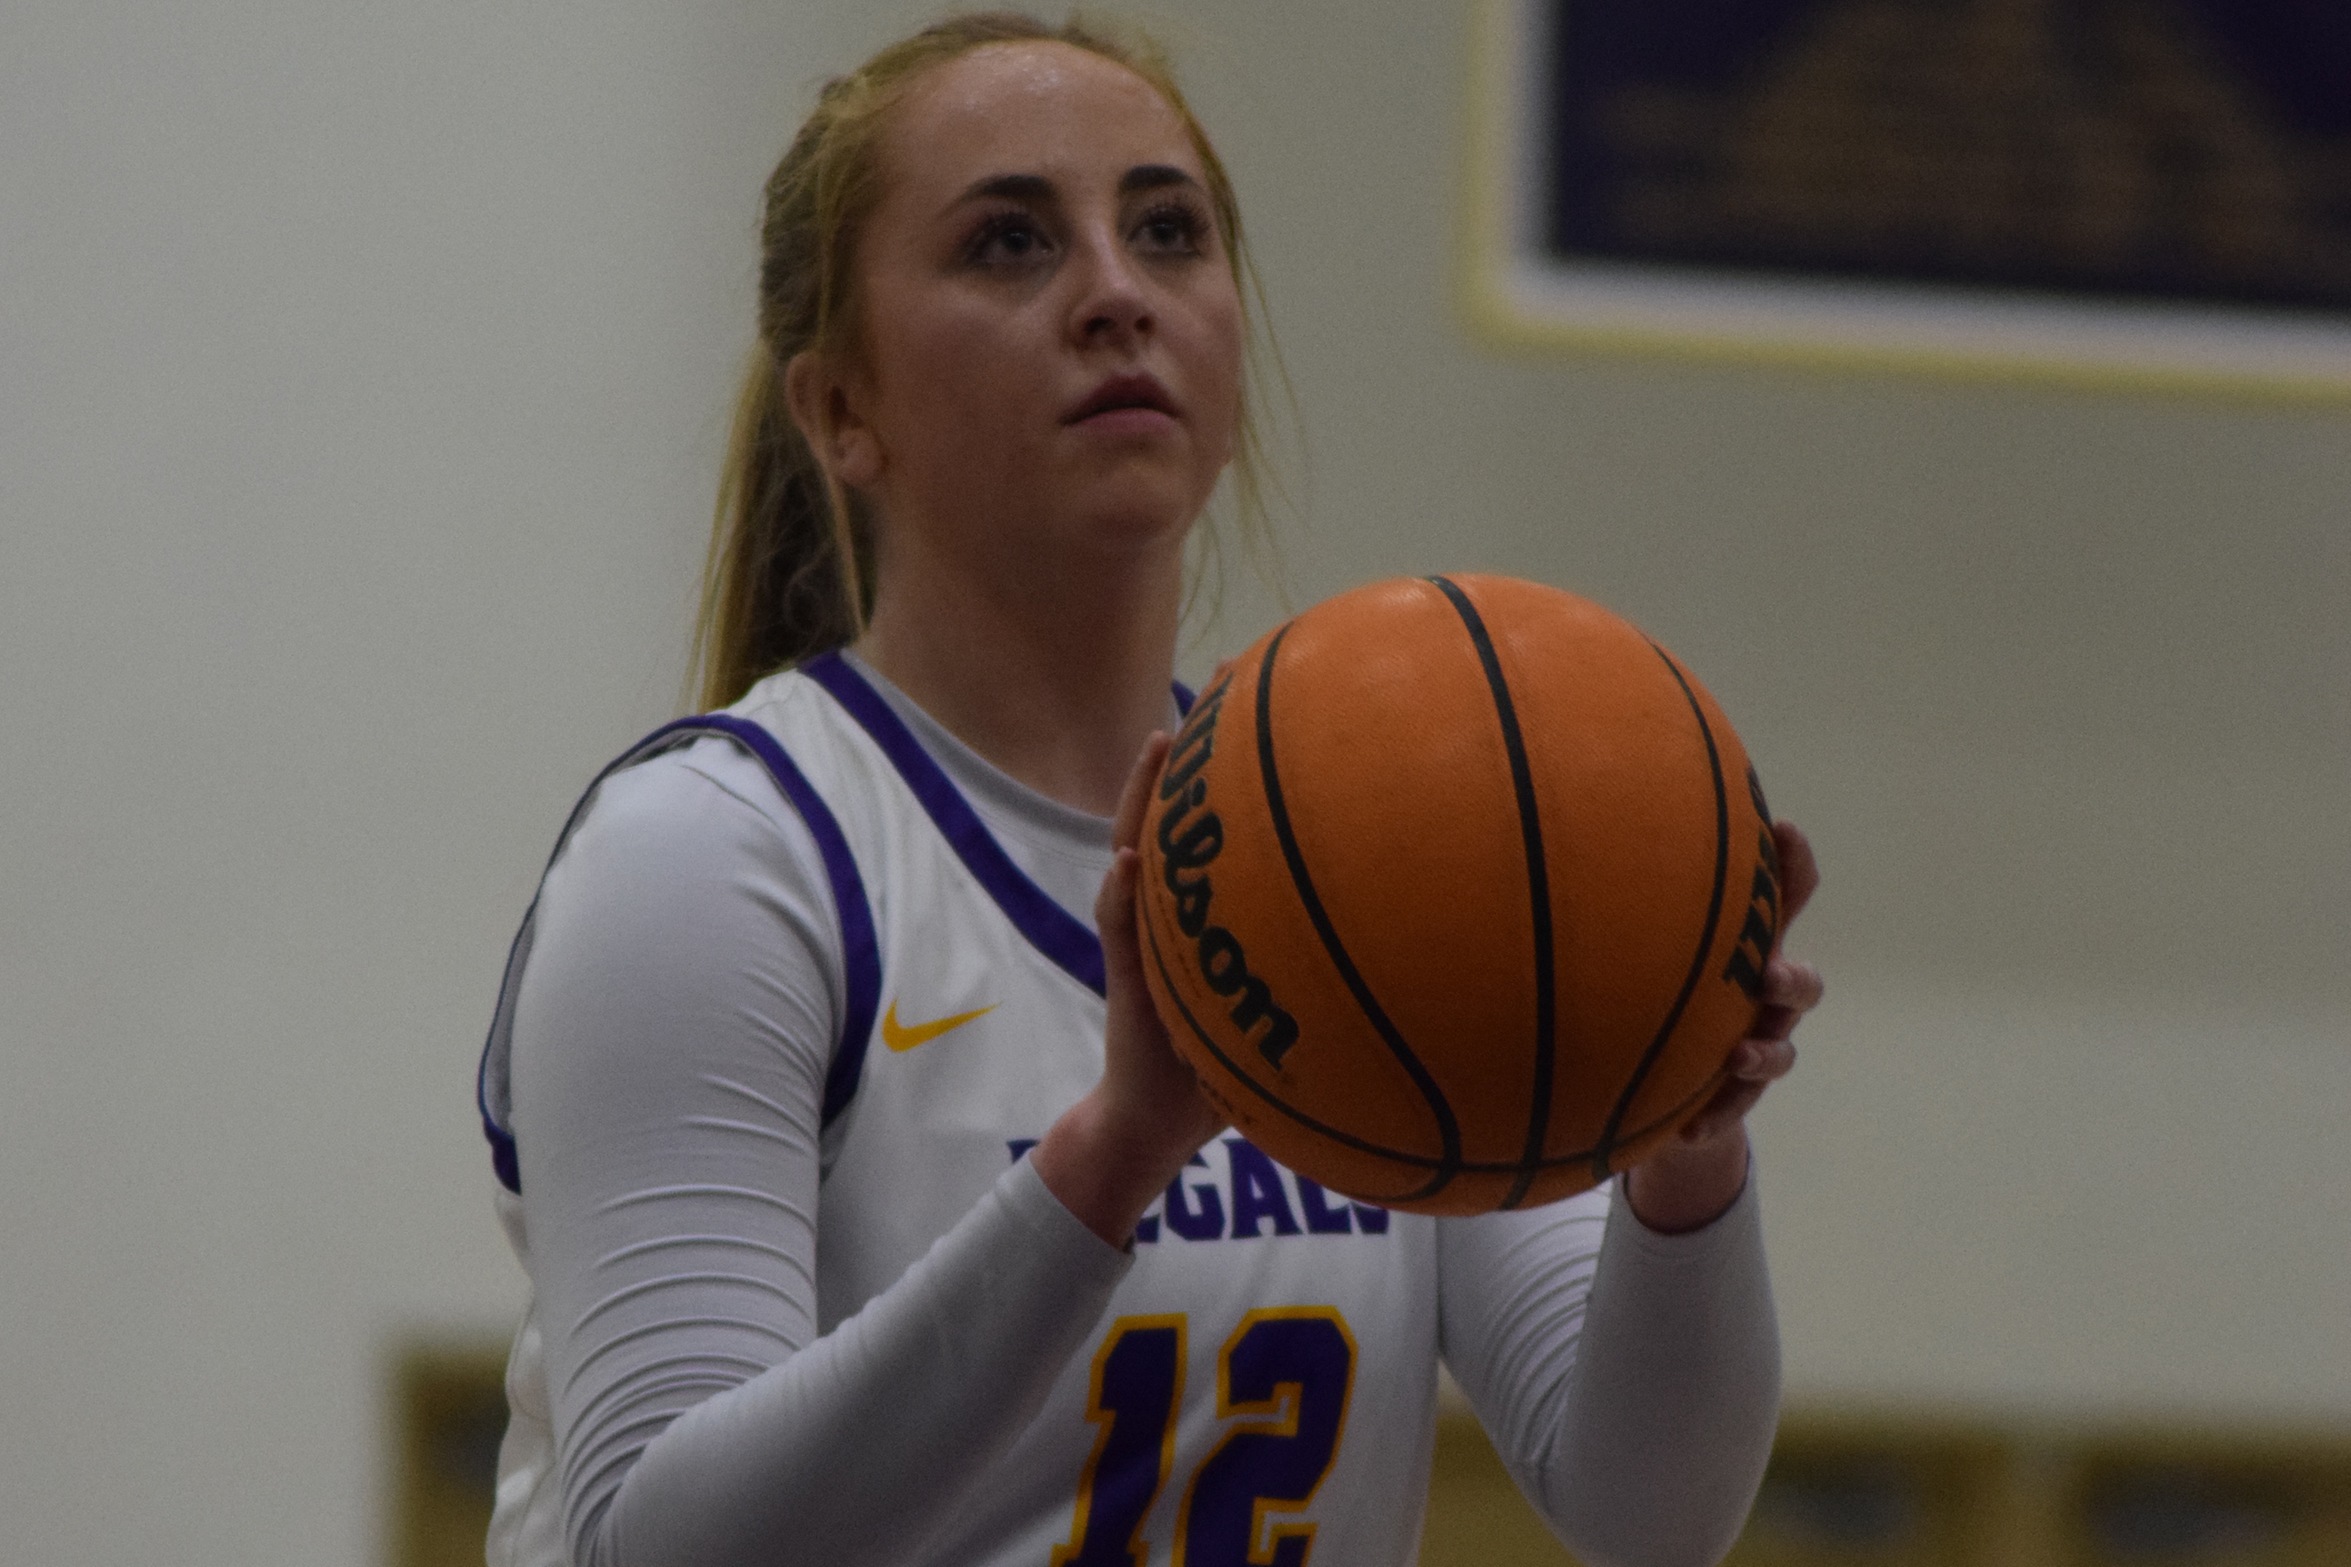 Regals Walk Away With Loss; Godines Brings Home 23 Points